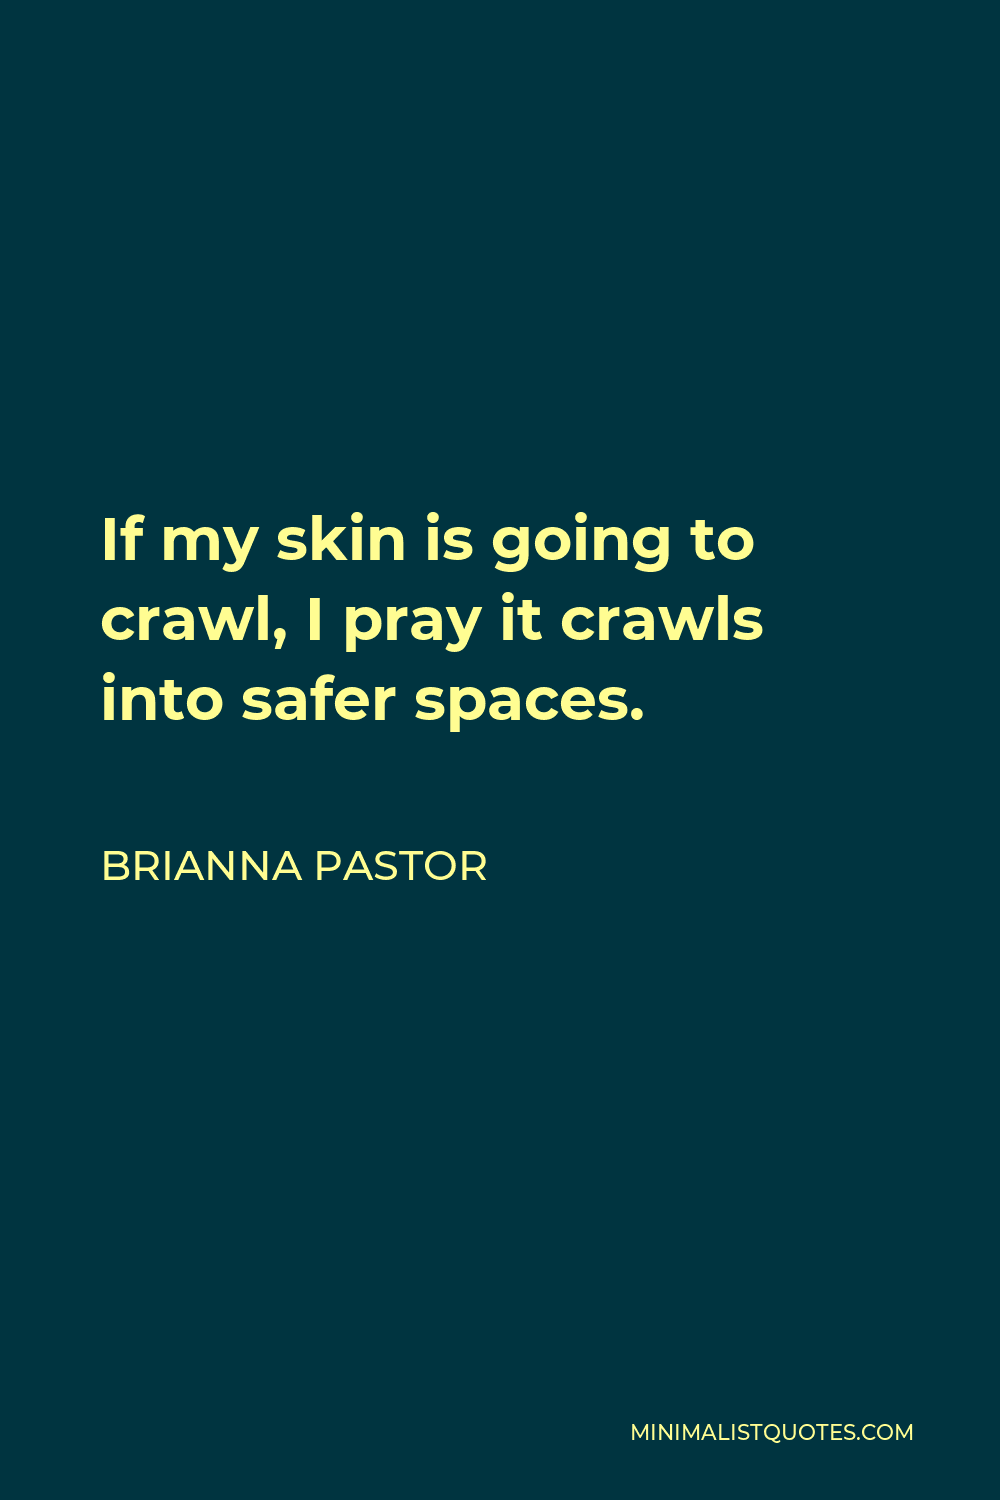 Brianna Pastor Quote - If my skin is going to crawl, I pray it crawls into safer spaces.